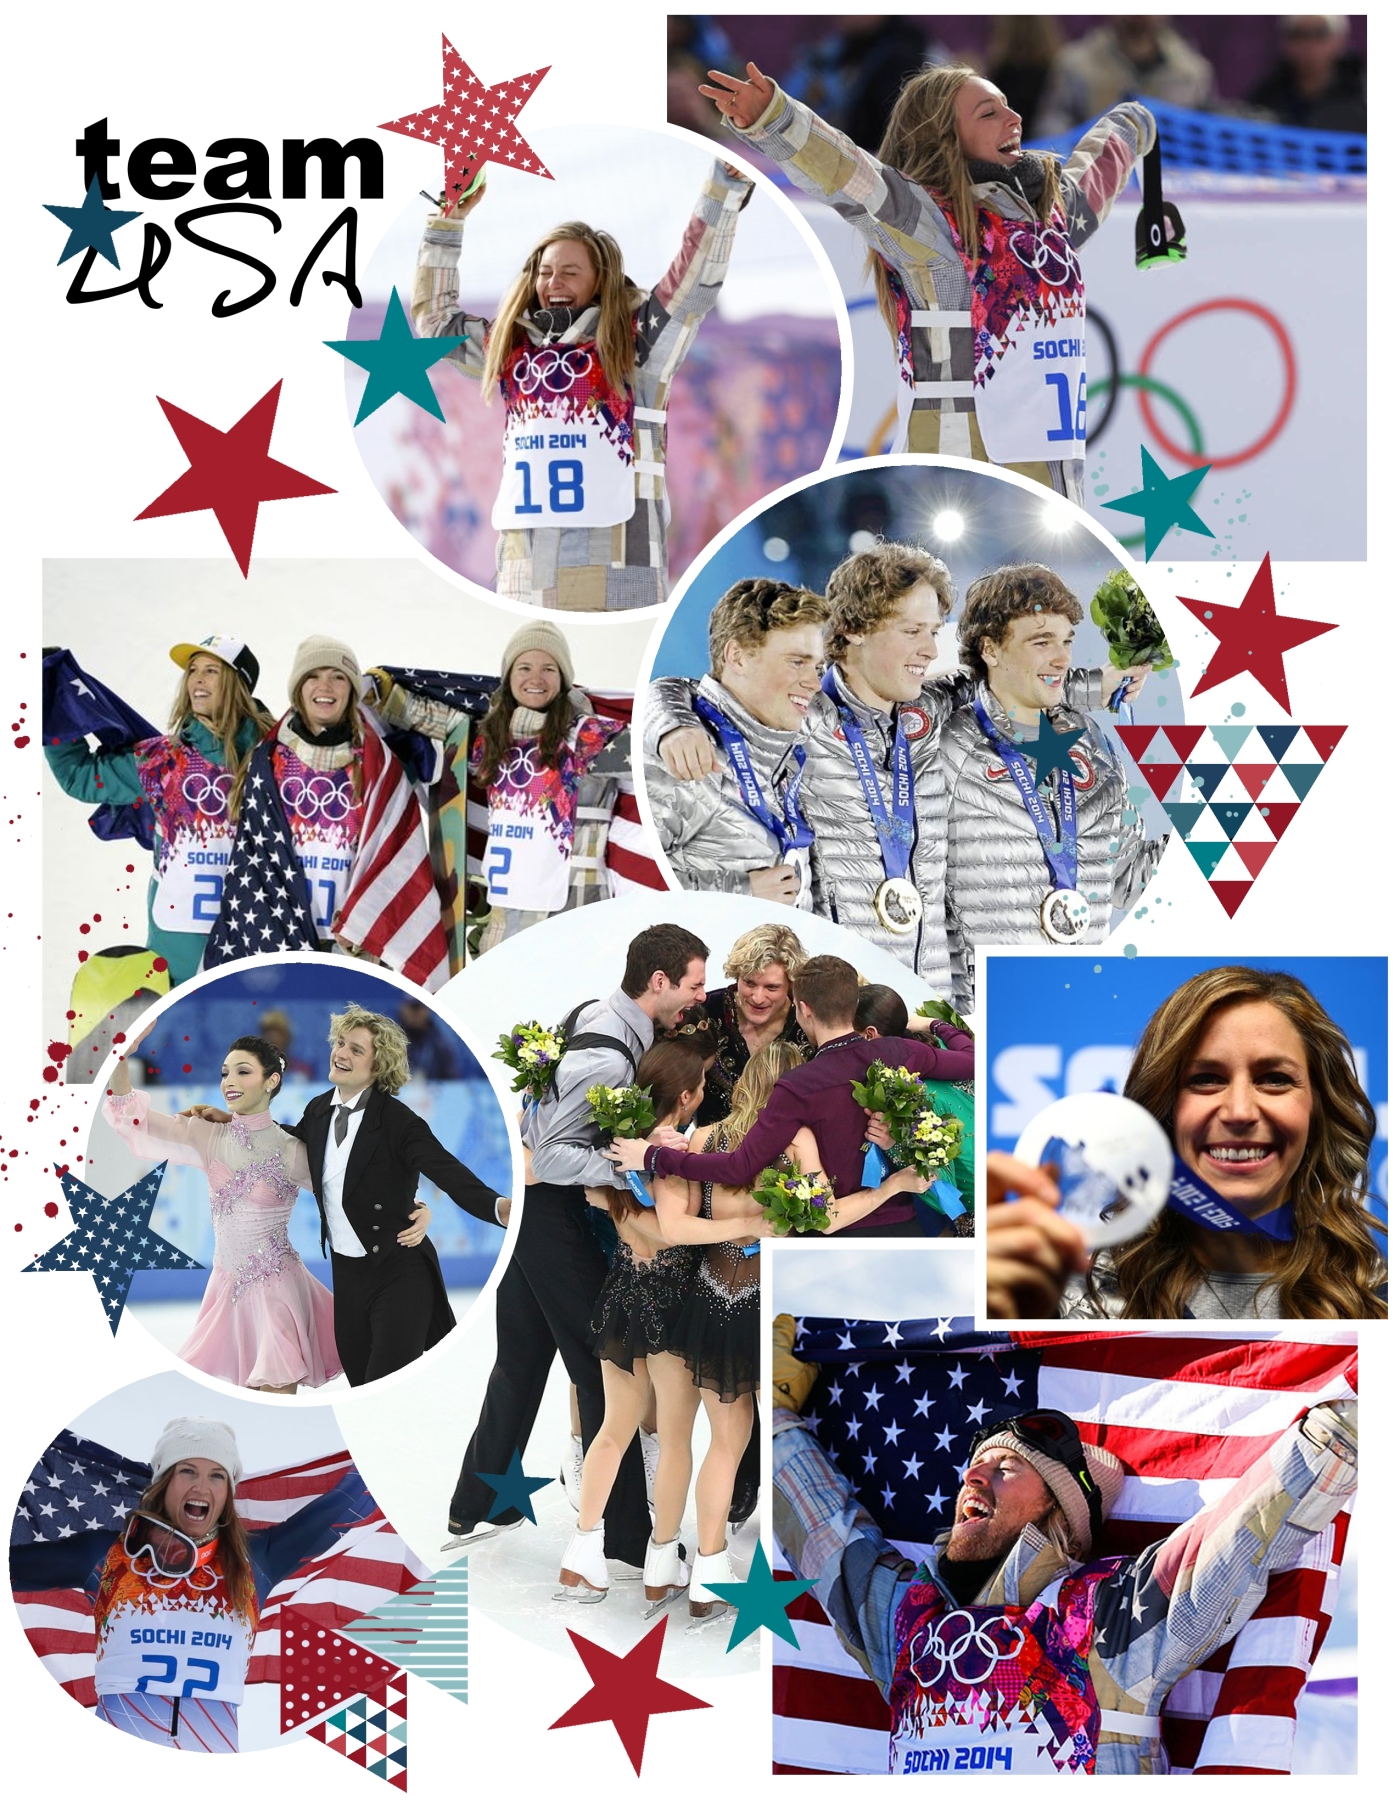 Best of Team USA Olympics 2014, Part 1! Sharing a few favorite scenes and moments from the winter 2014 Olympics! Text © Rissi JC